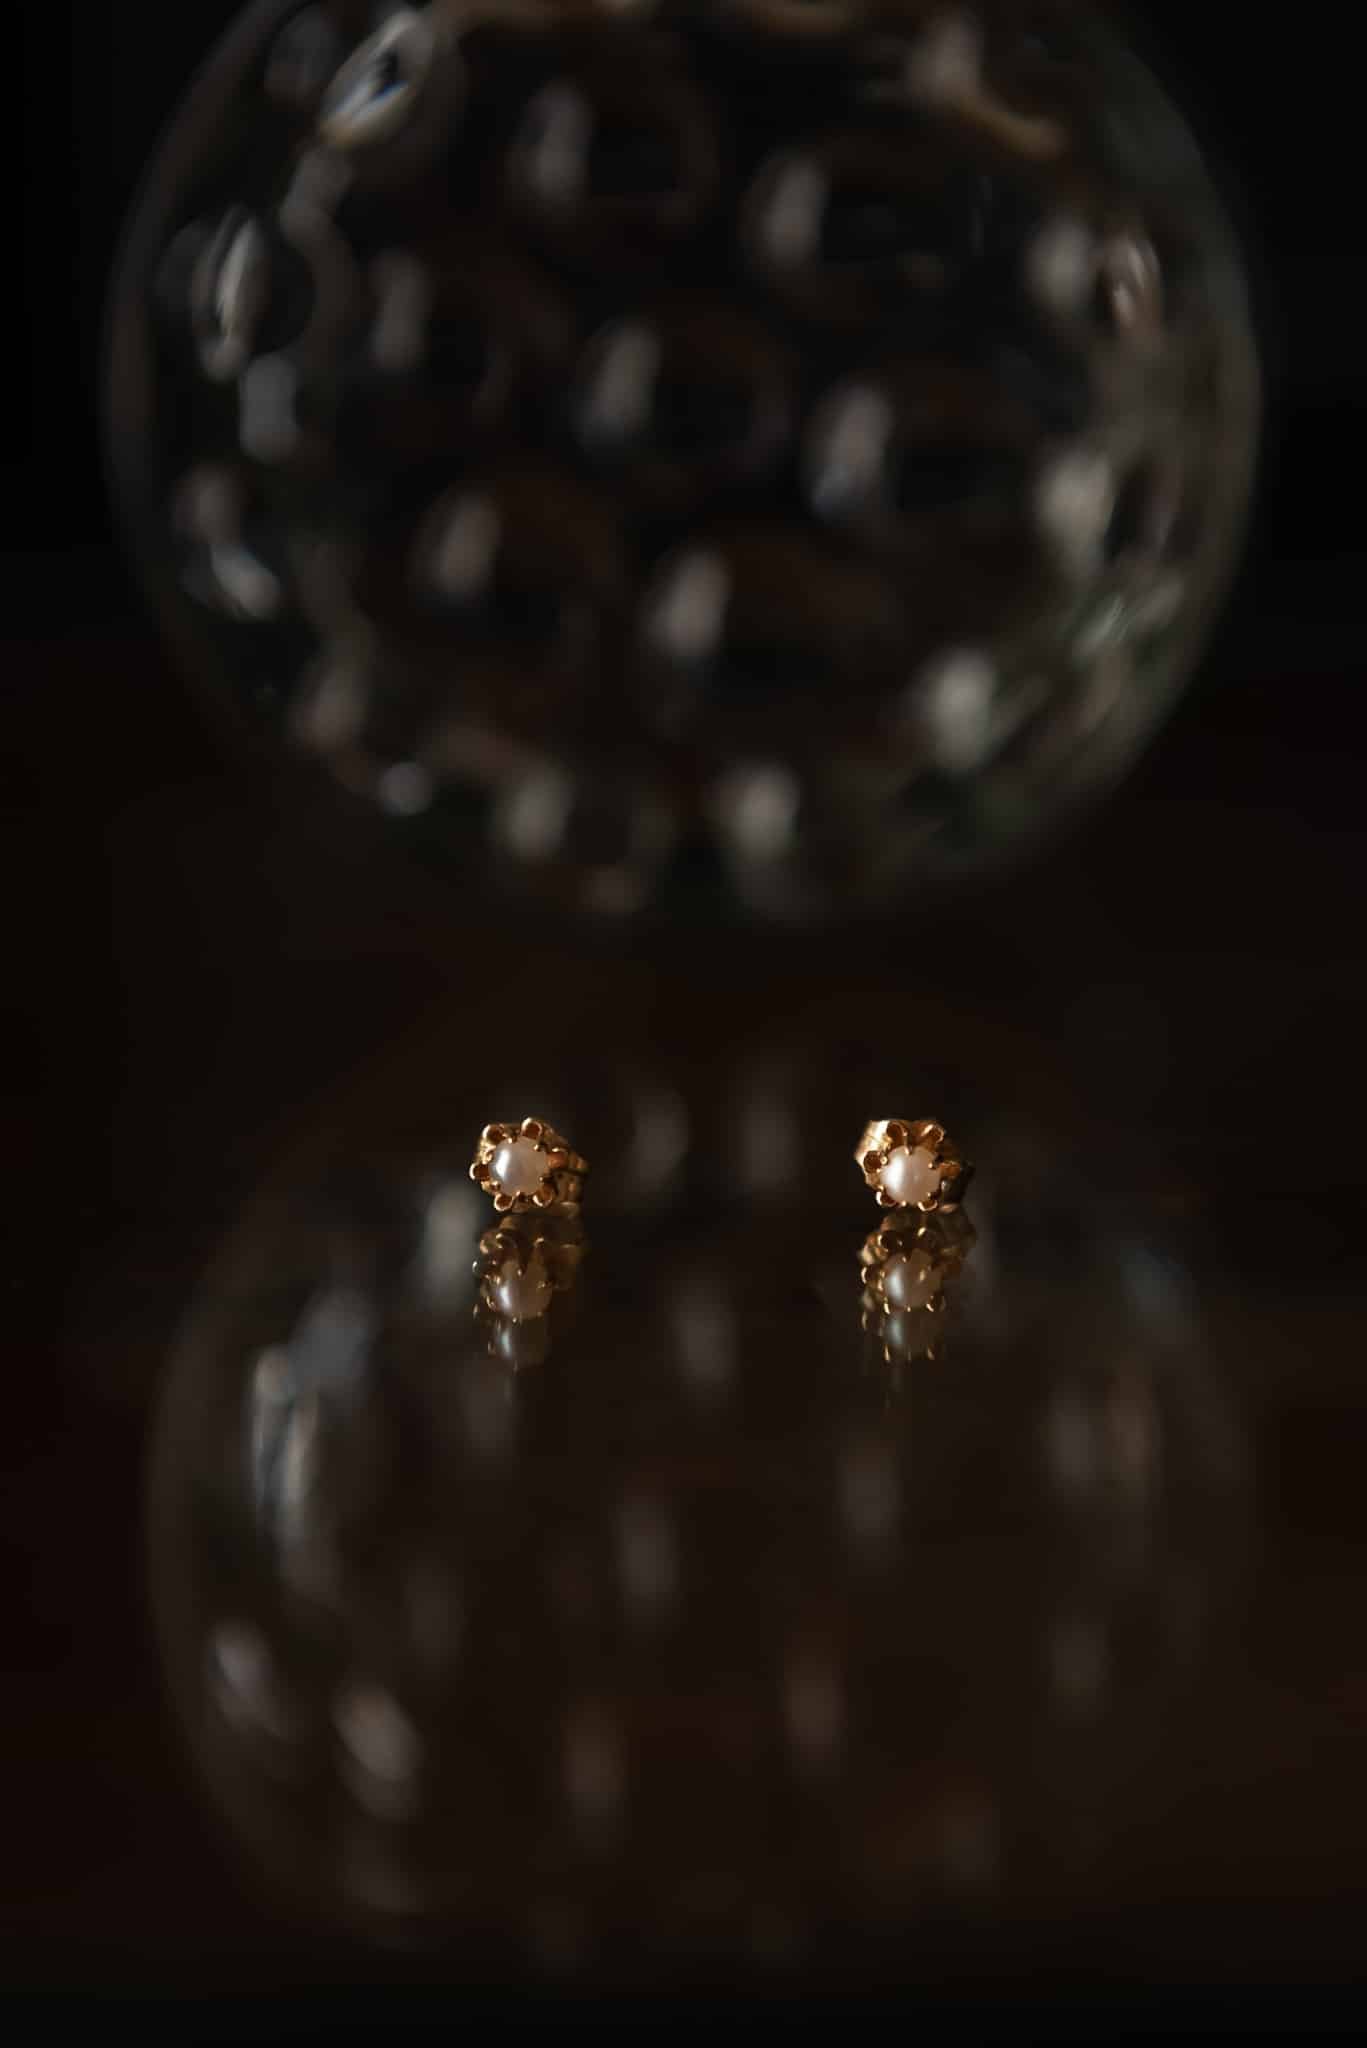 A bride's pearl earrings on a black reflective surface.